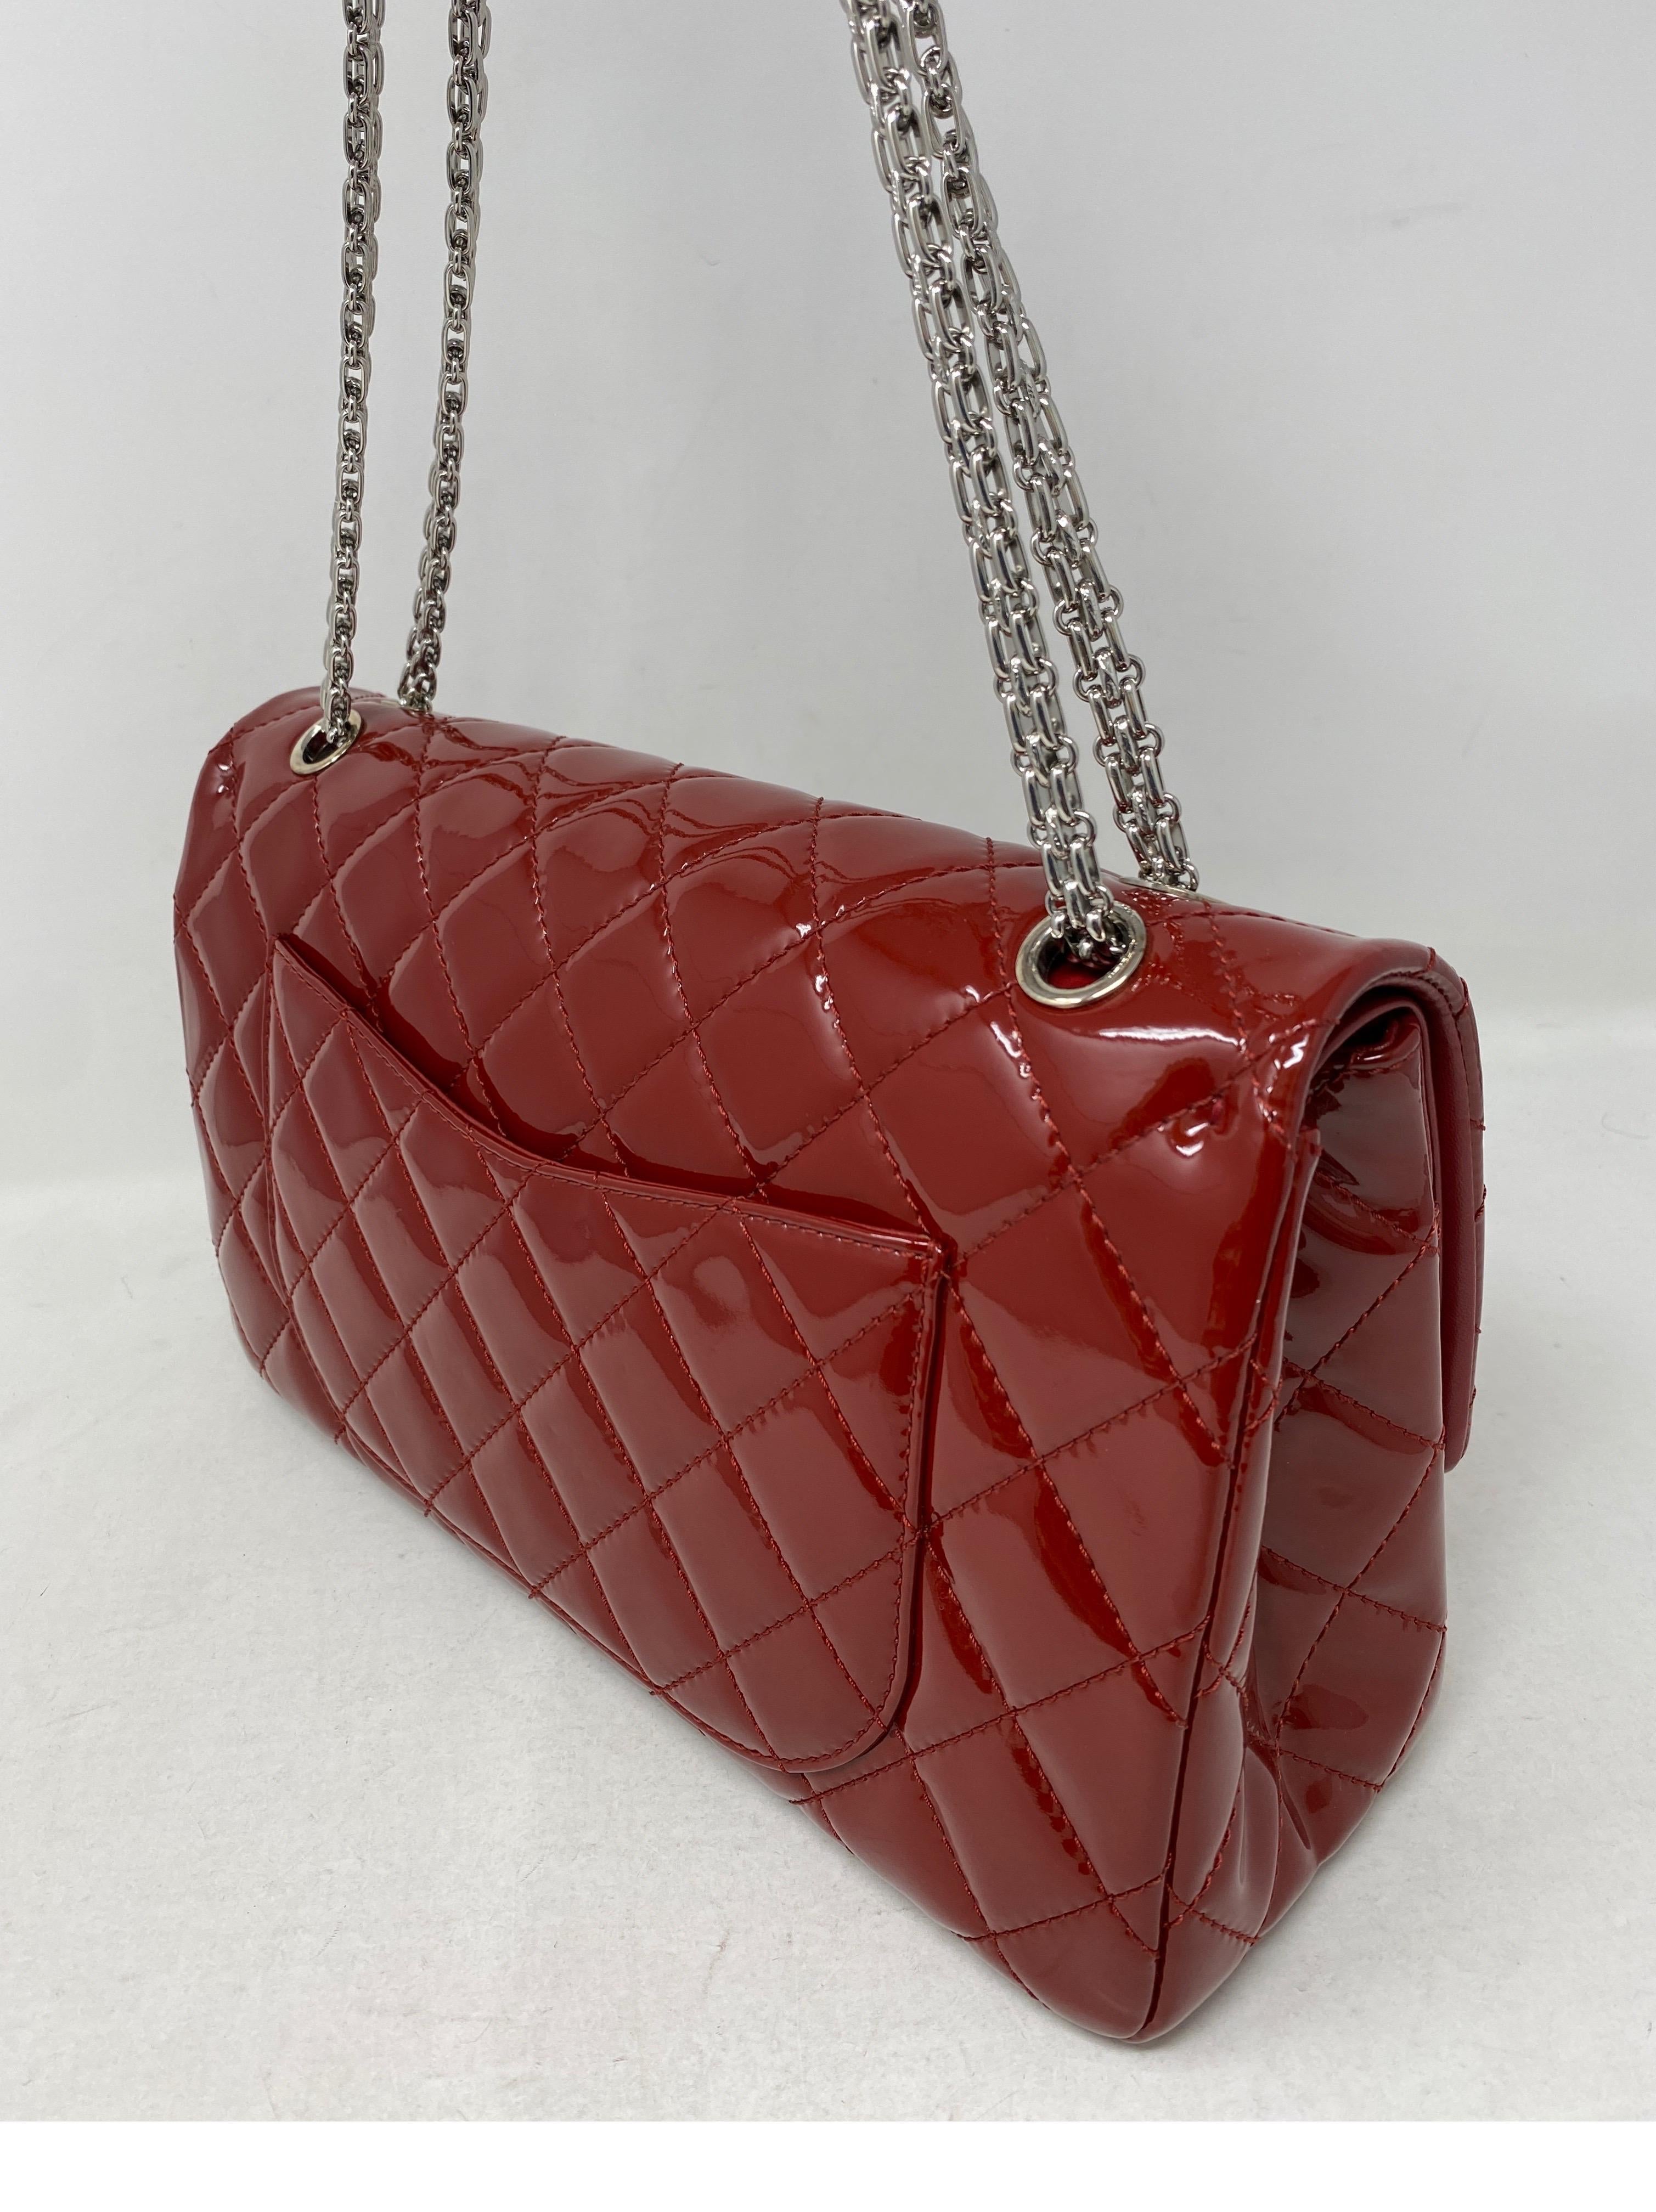 Chanel Red Jumbo Patent Reissue Leather Bag  1